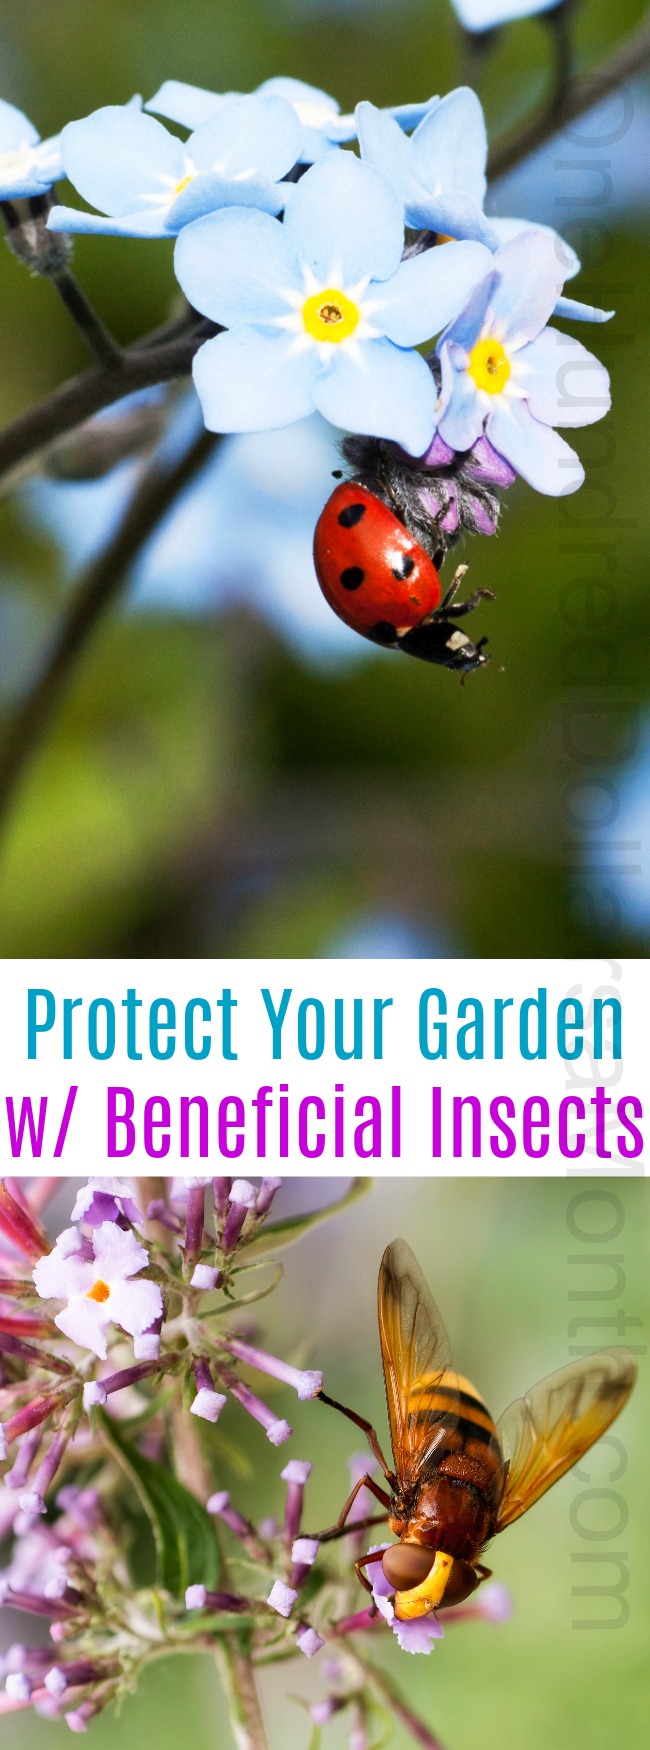 Protect Your Garden with Beneficial Insects